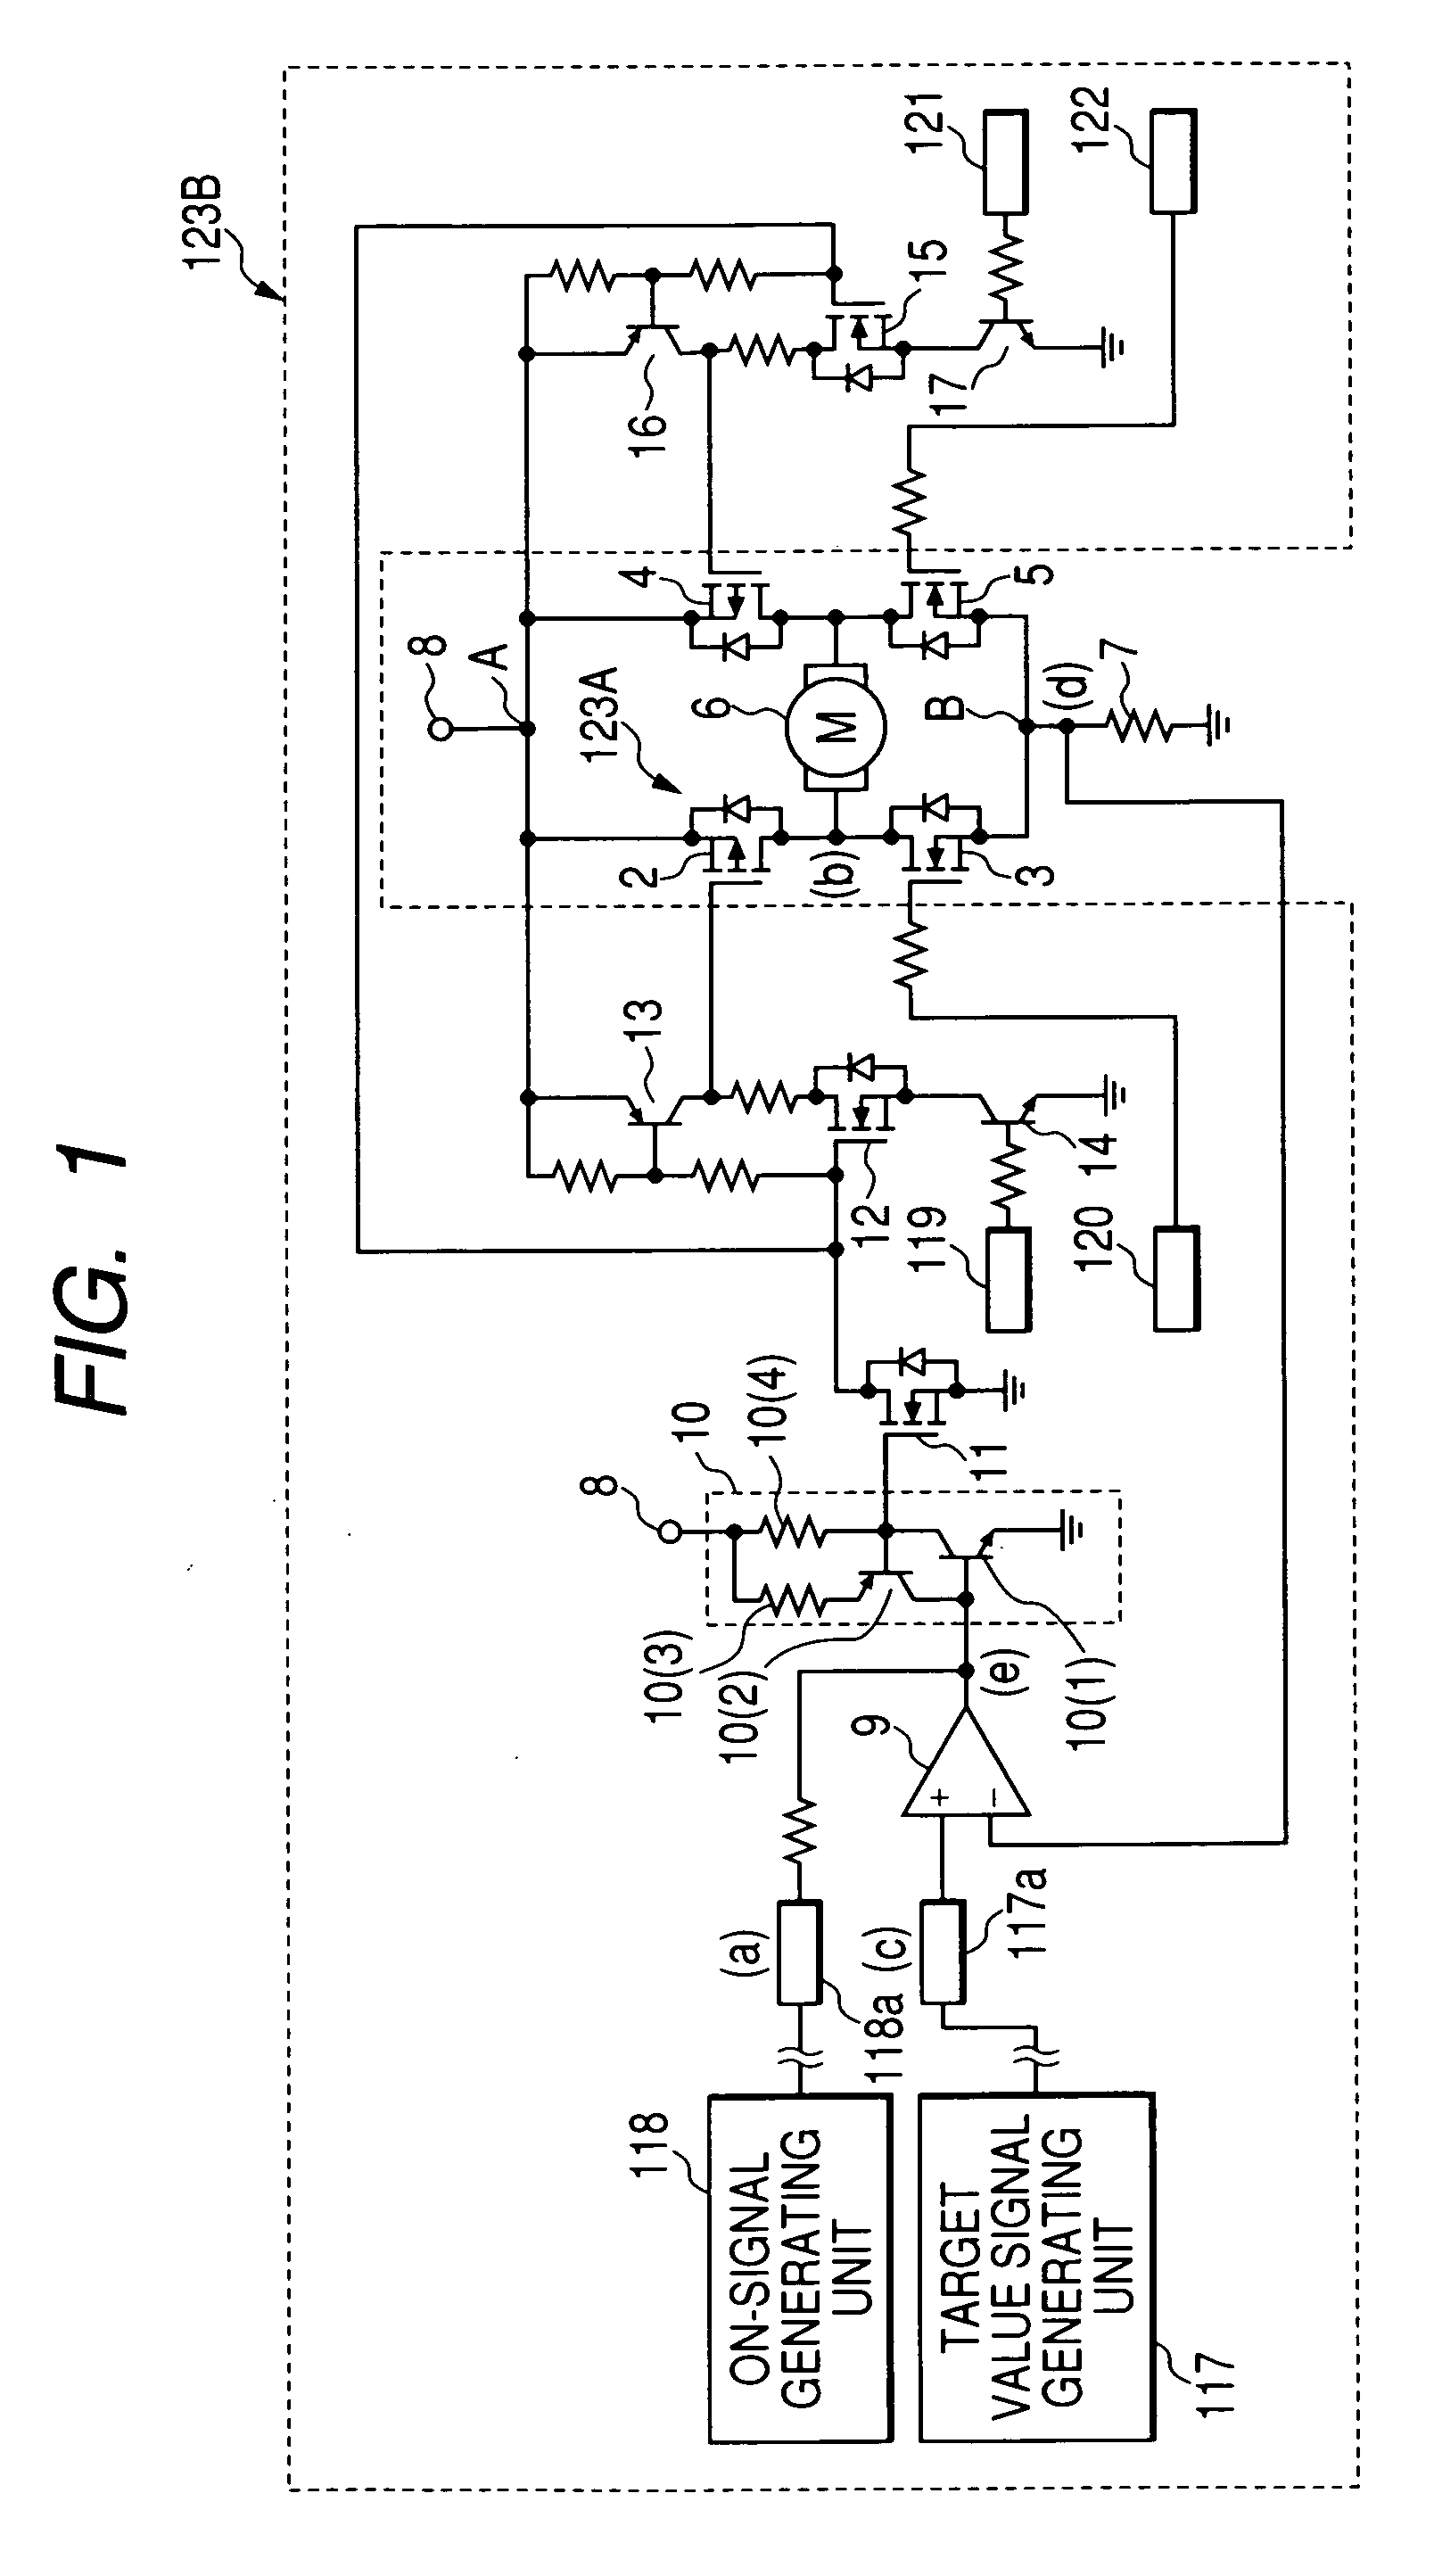 Motor driving control device to be driven at interval of constant time